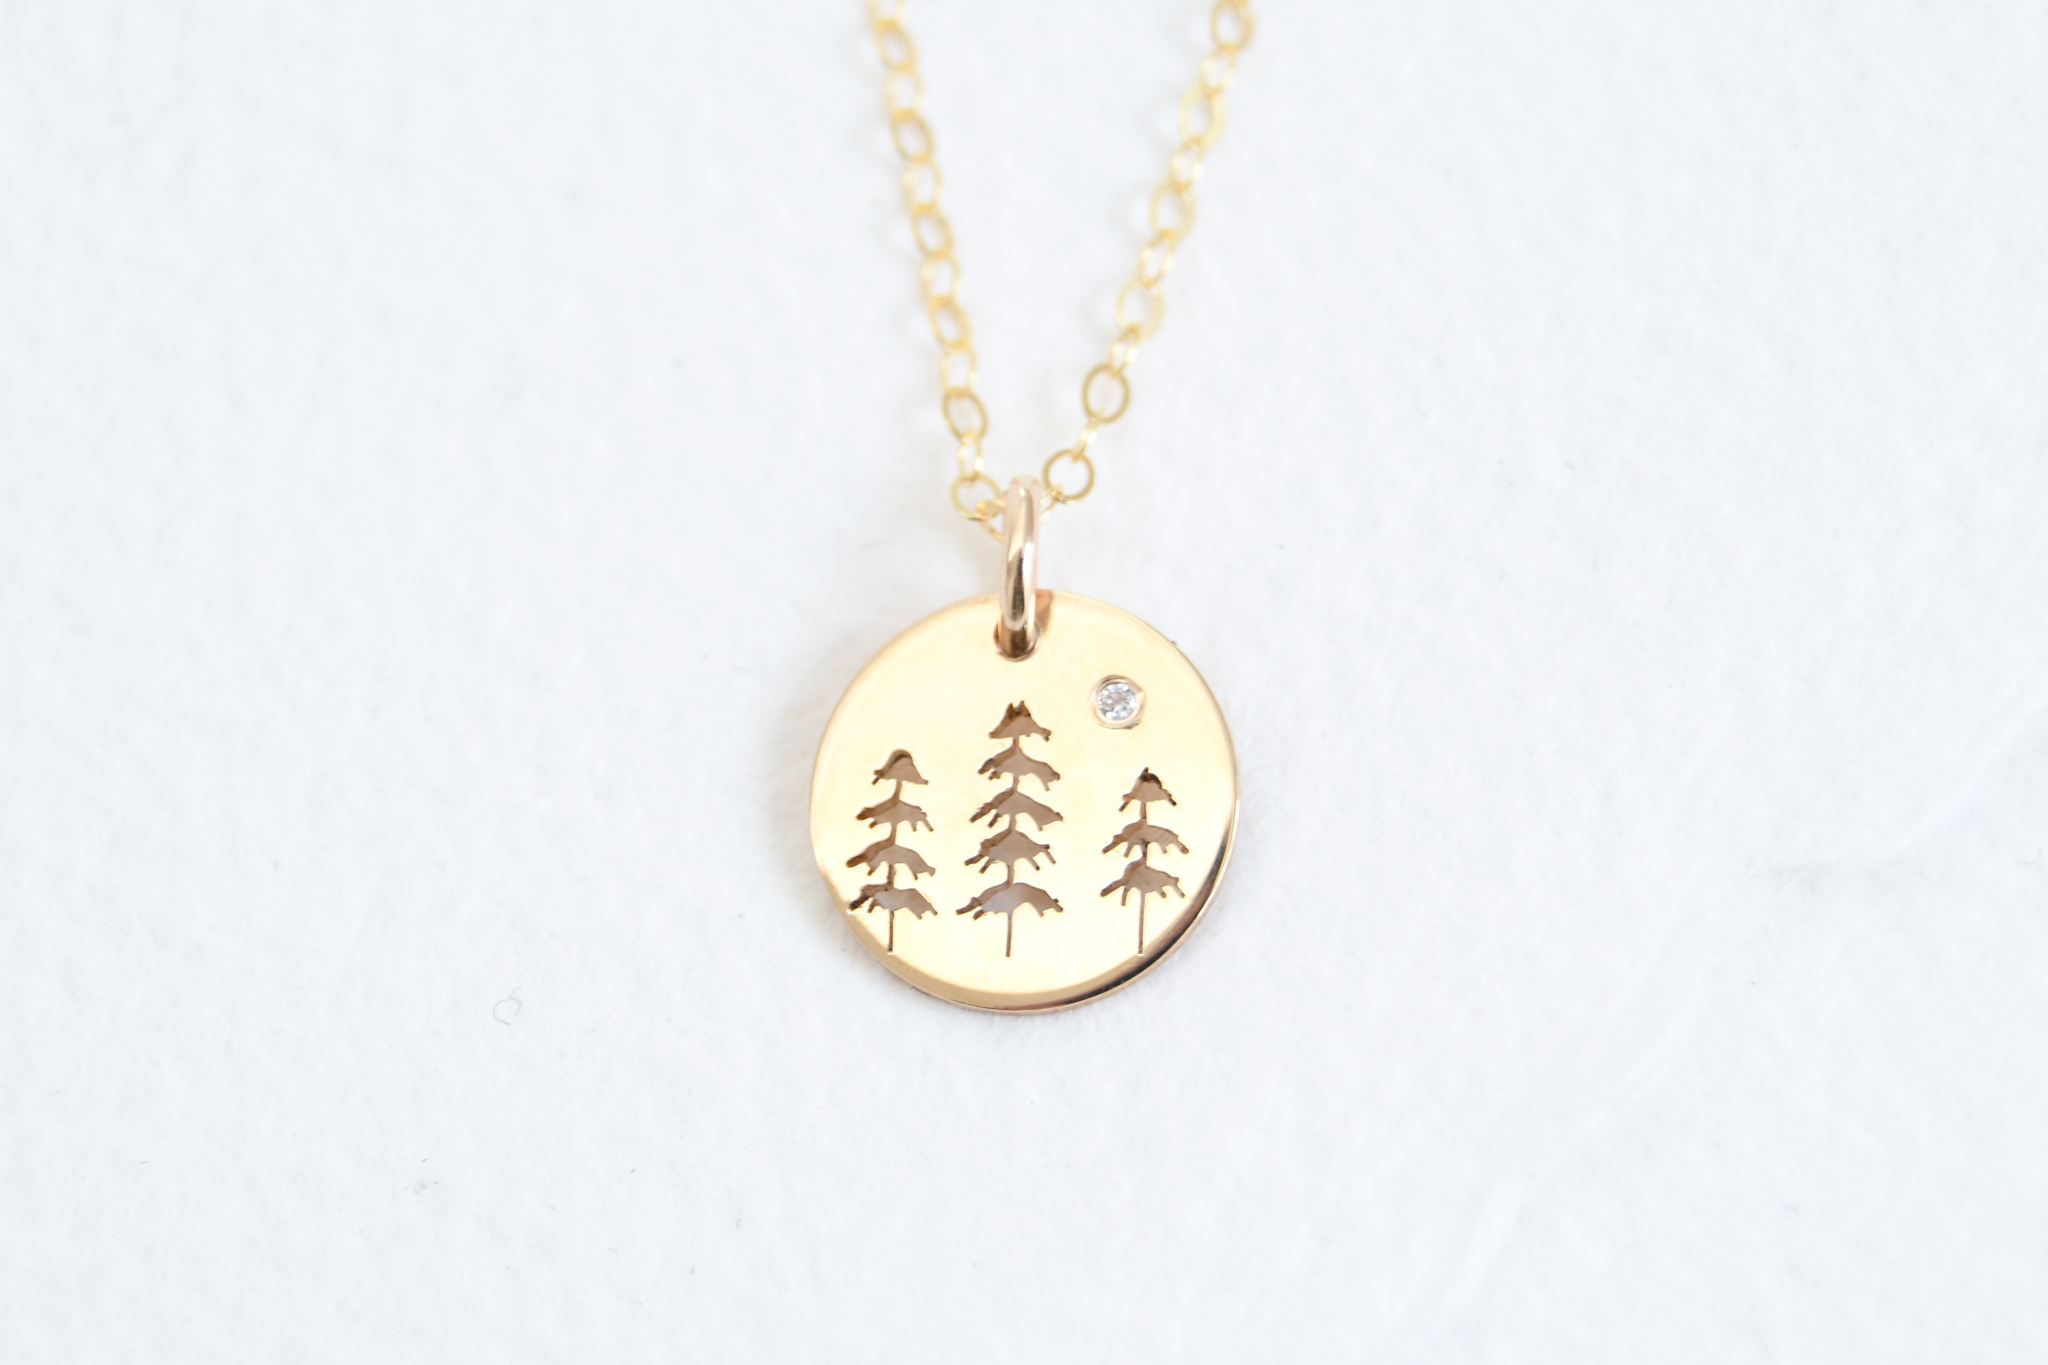 Emily Carr Tree Trio Necklace - Ebony and Sparrow | Made in Canada